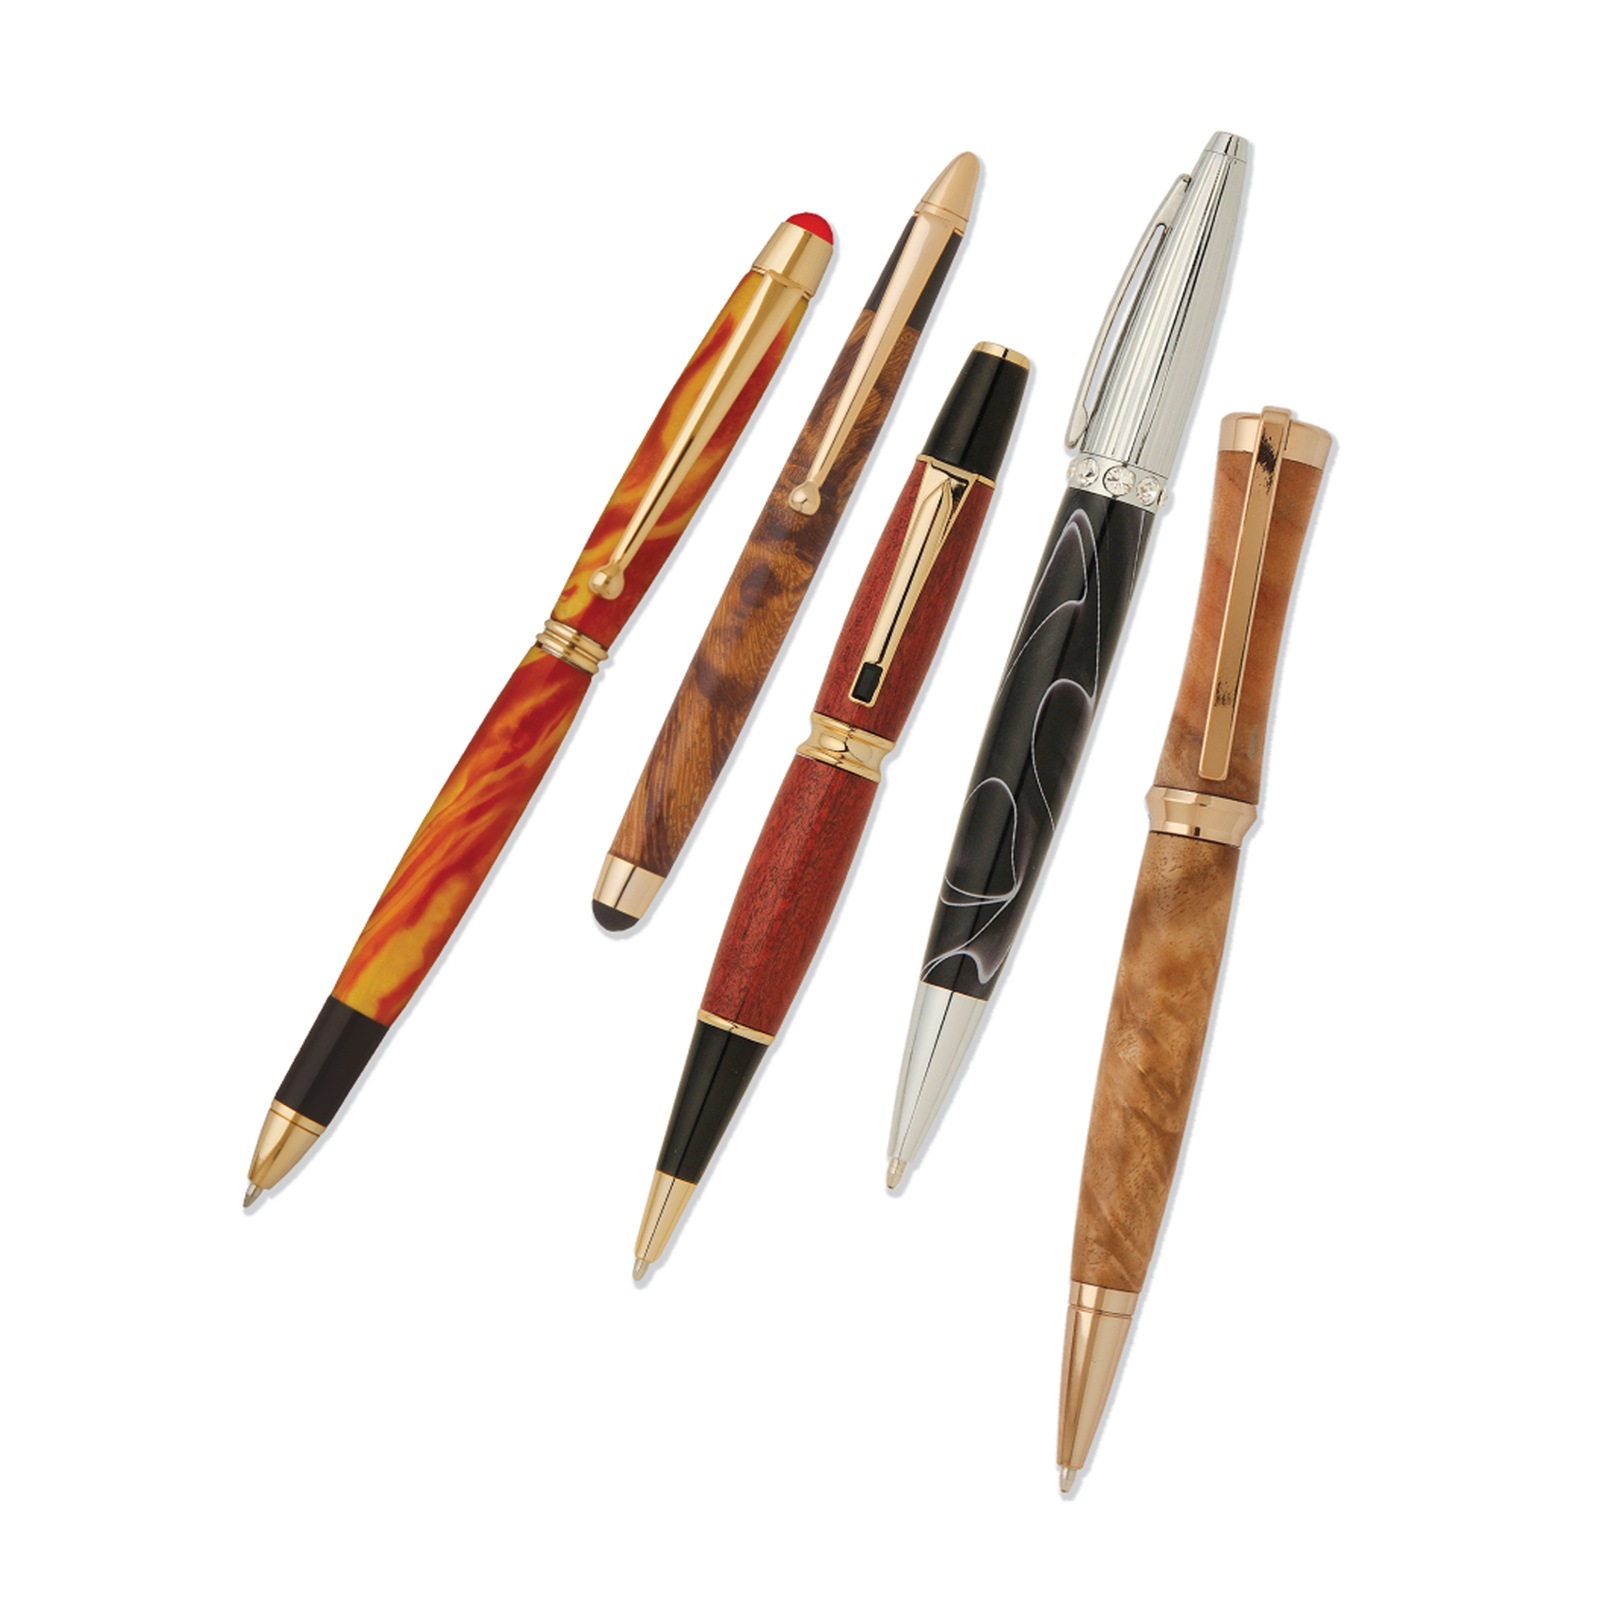 7mm Pen Kit Bundle V2: 8 Pen Kits and 3 sets of FREE Bushings and 1pk of  Cocobolo Blanks